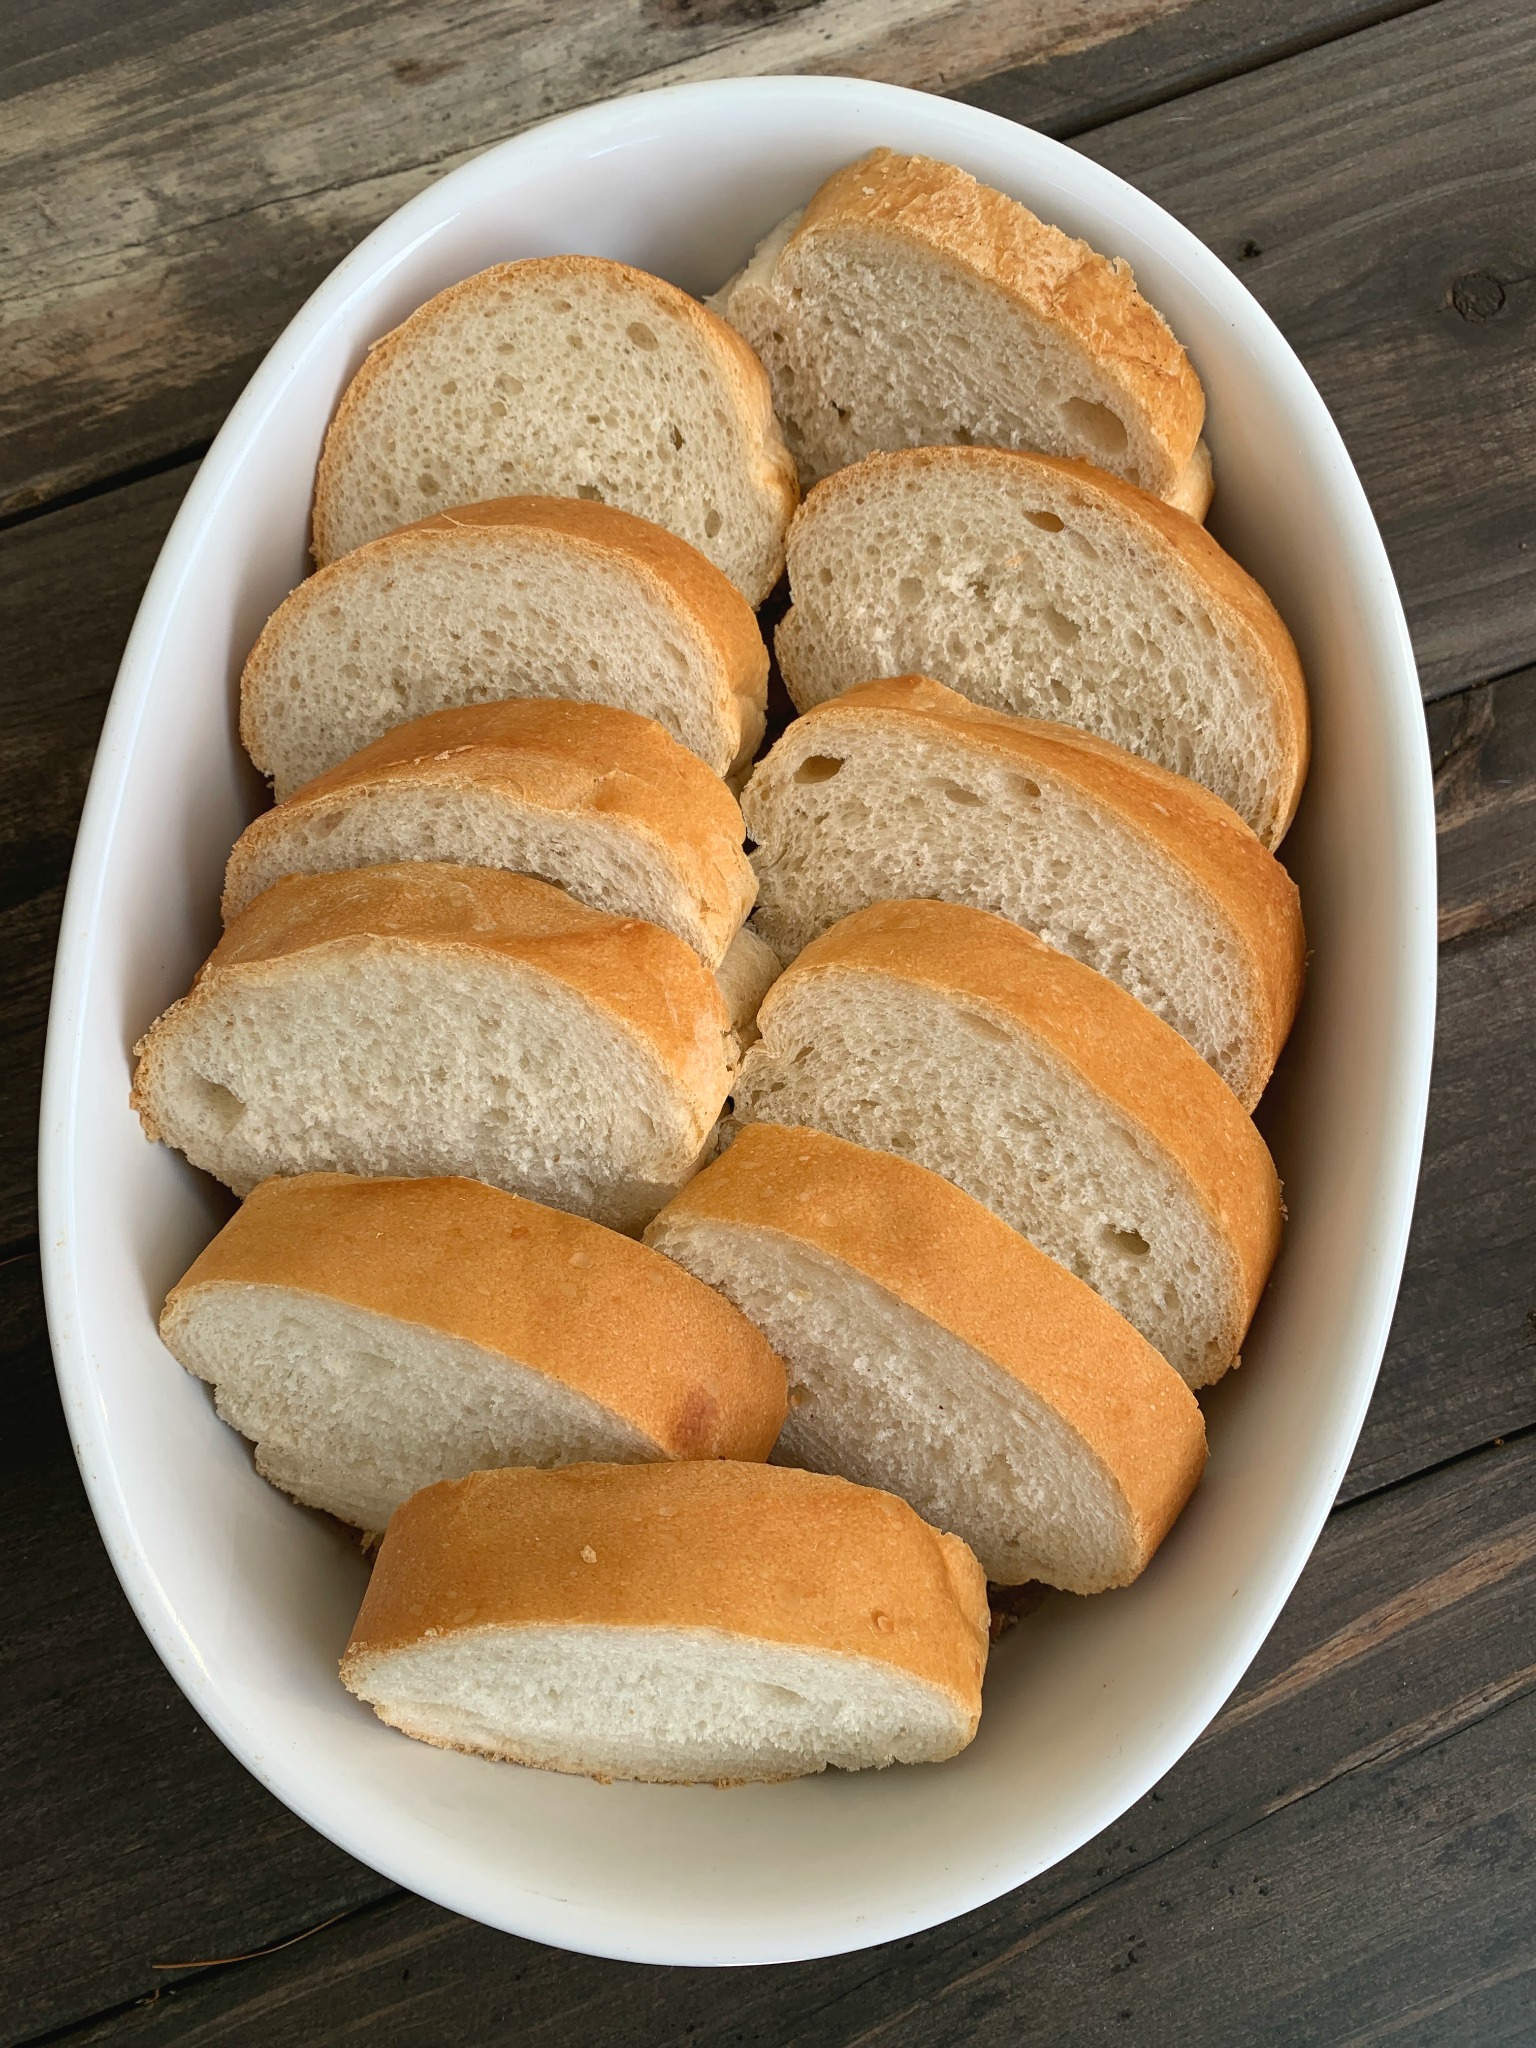 white oval baking dish with bread slices lined up